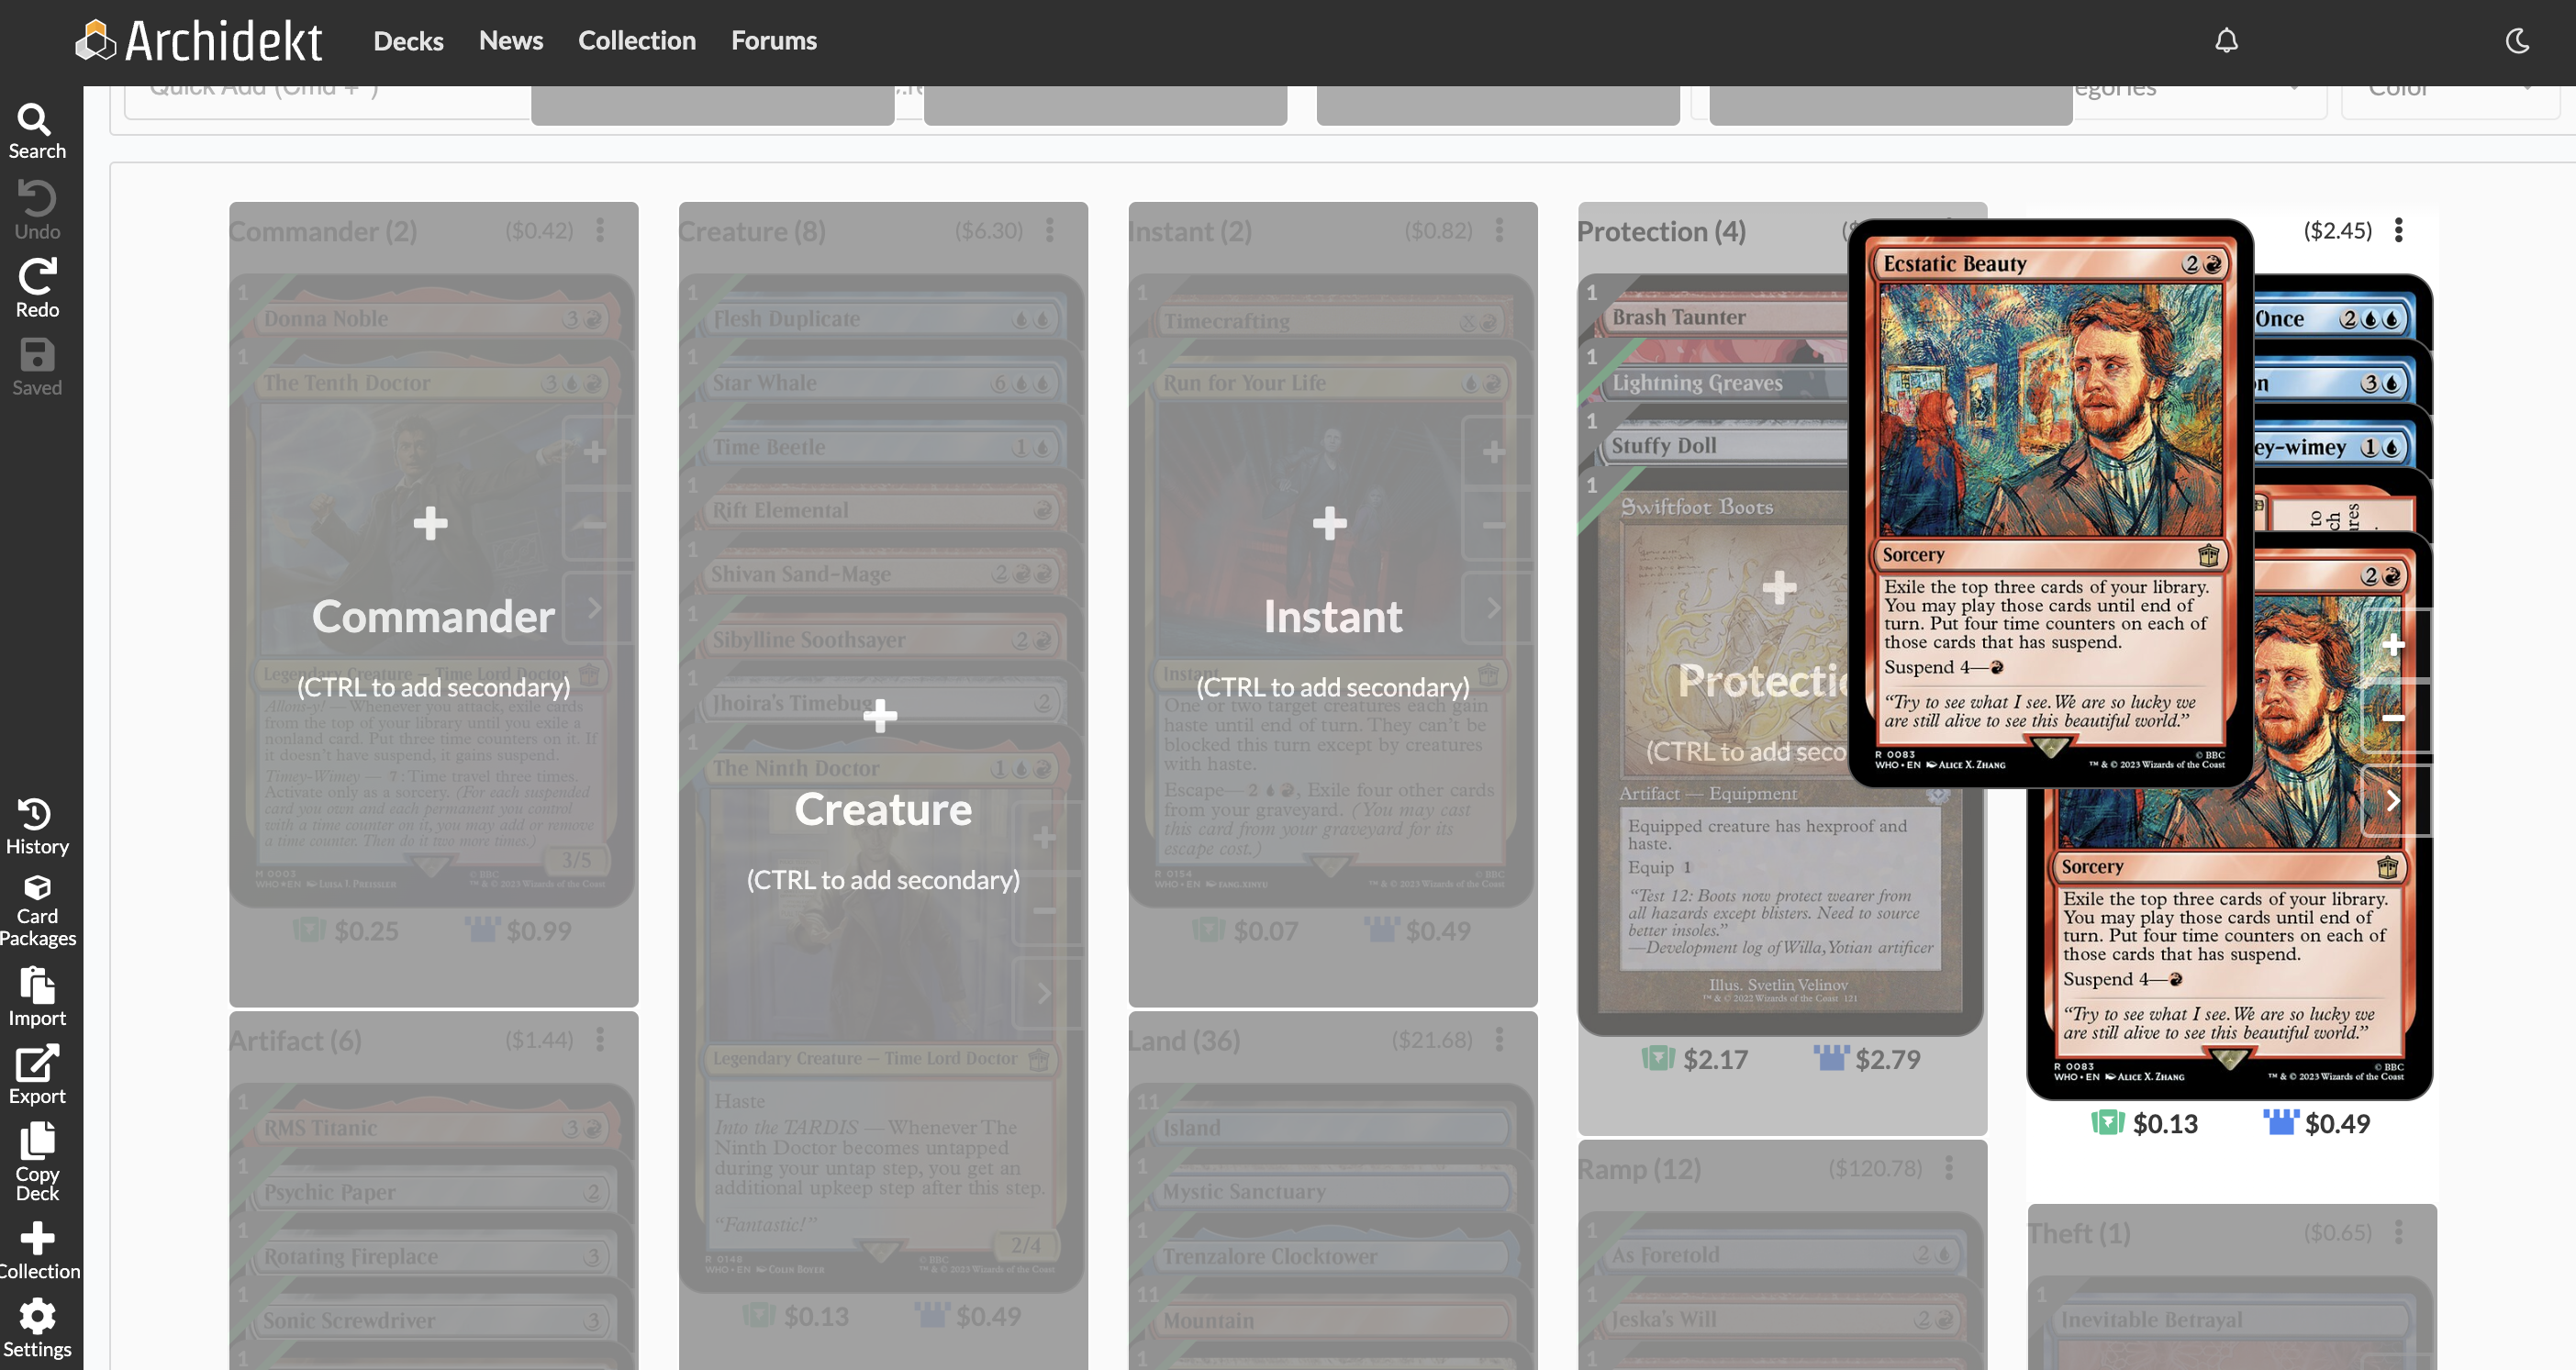 A screengrab of a deck view on the Archidekt website, showing several category buckets labeled things like Commander, Creature, and Sorcery. A card called Ecstatic Beauty has been selected from the Sorcery bucket and is in the process of being moved.